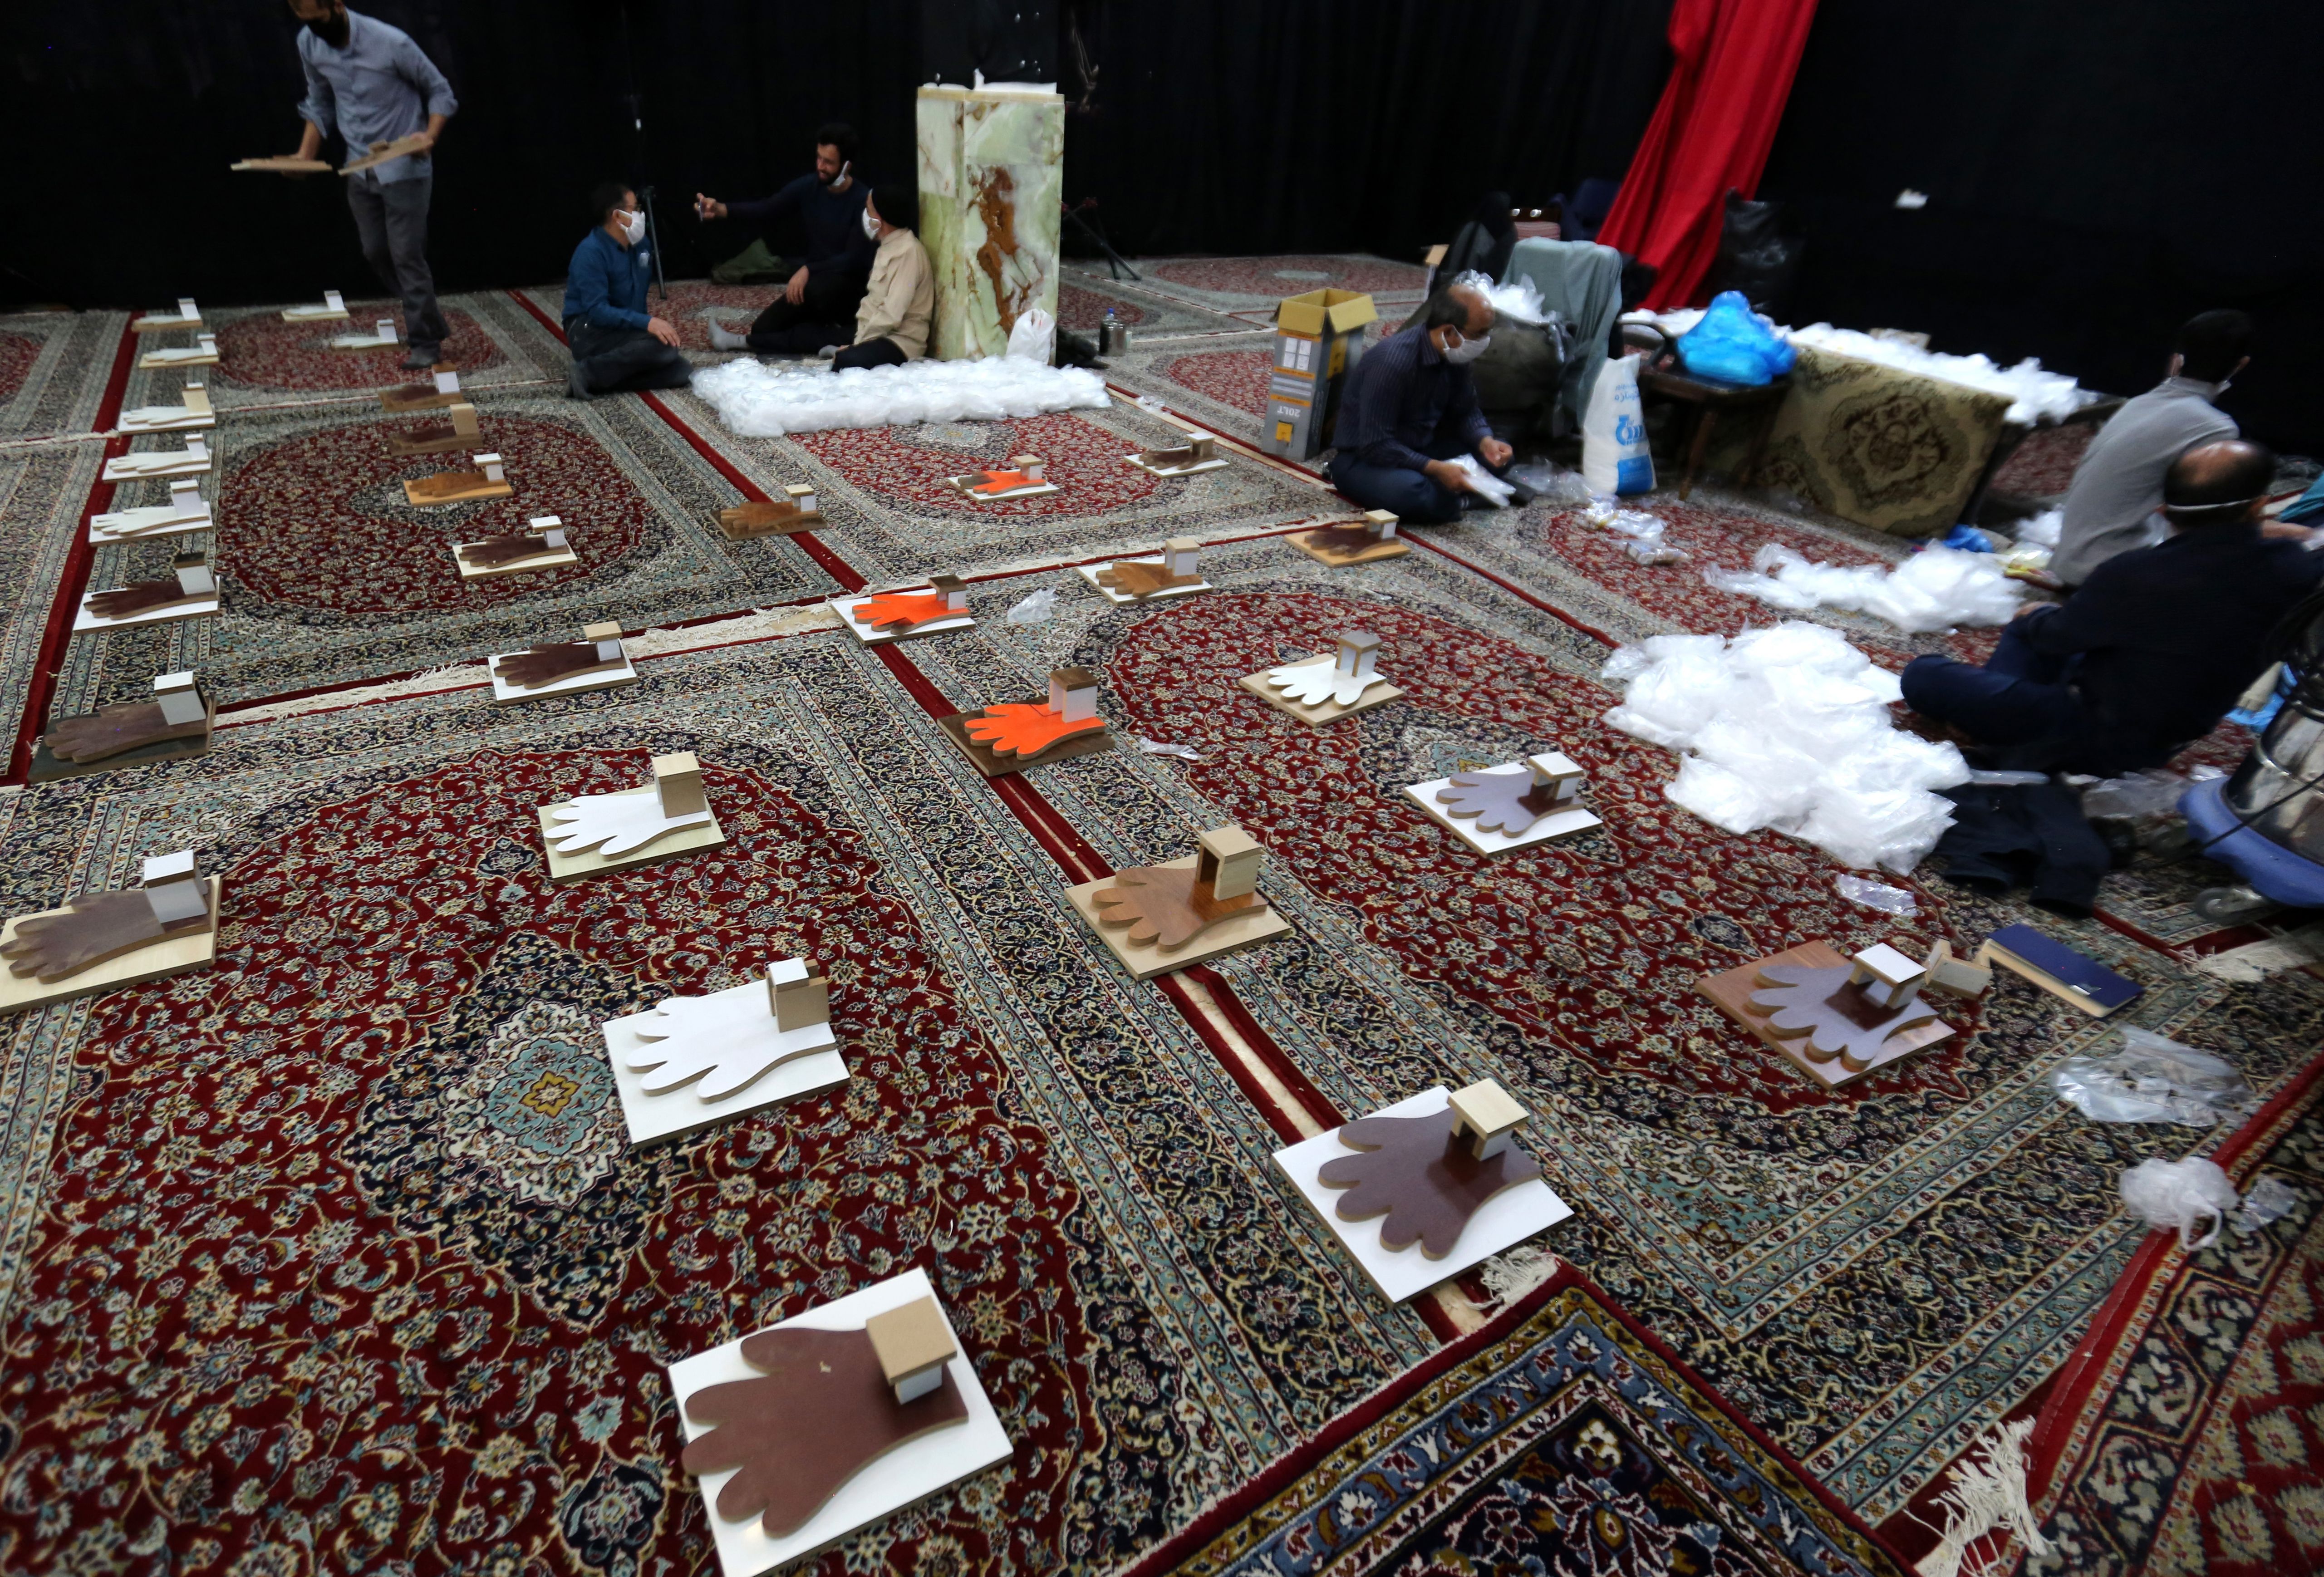 Iranian men, members of paramilitary organisation Basij, make protective gloves inside a mosque in the capital Tehran. (Photo by ATTA KENARE/AFP via Getty Images)